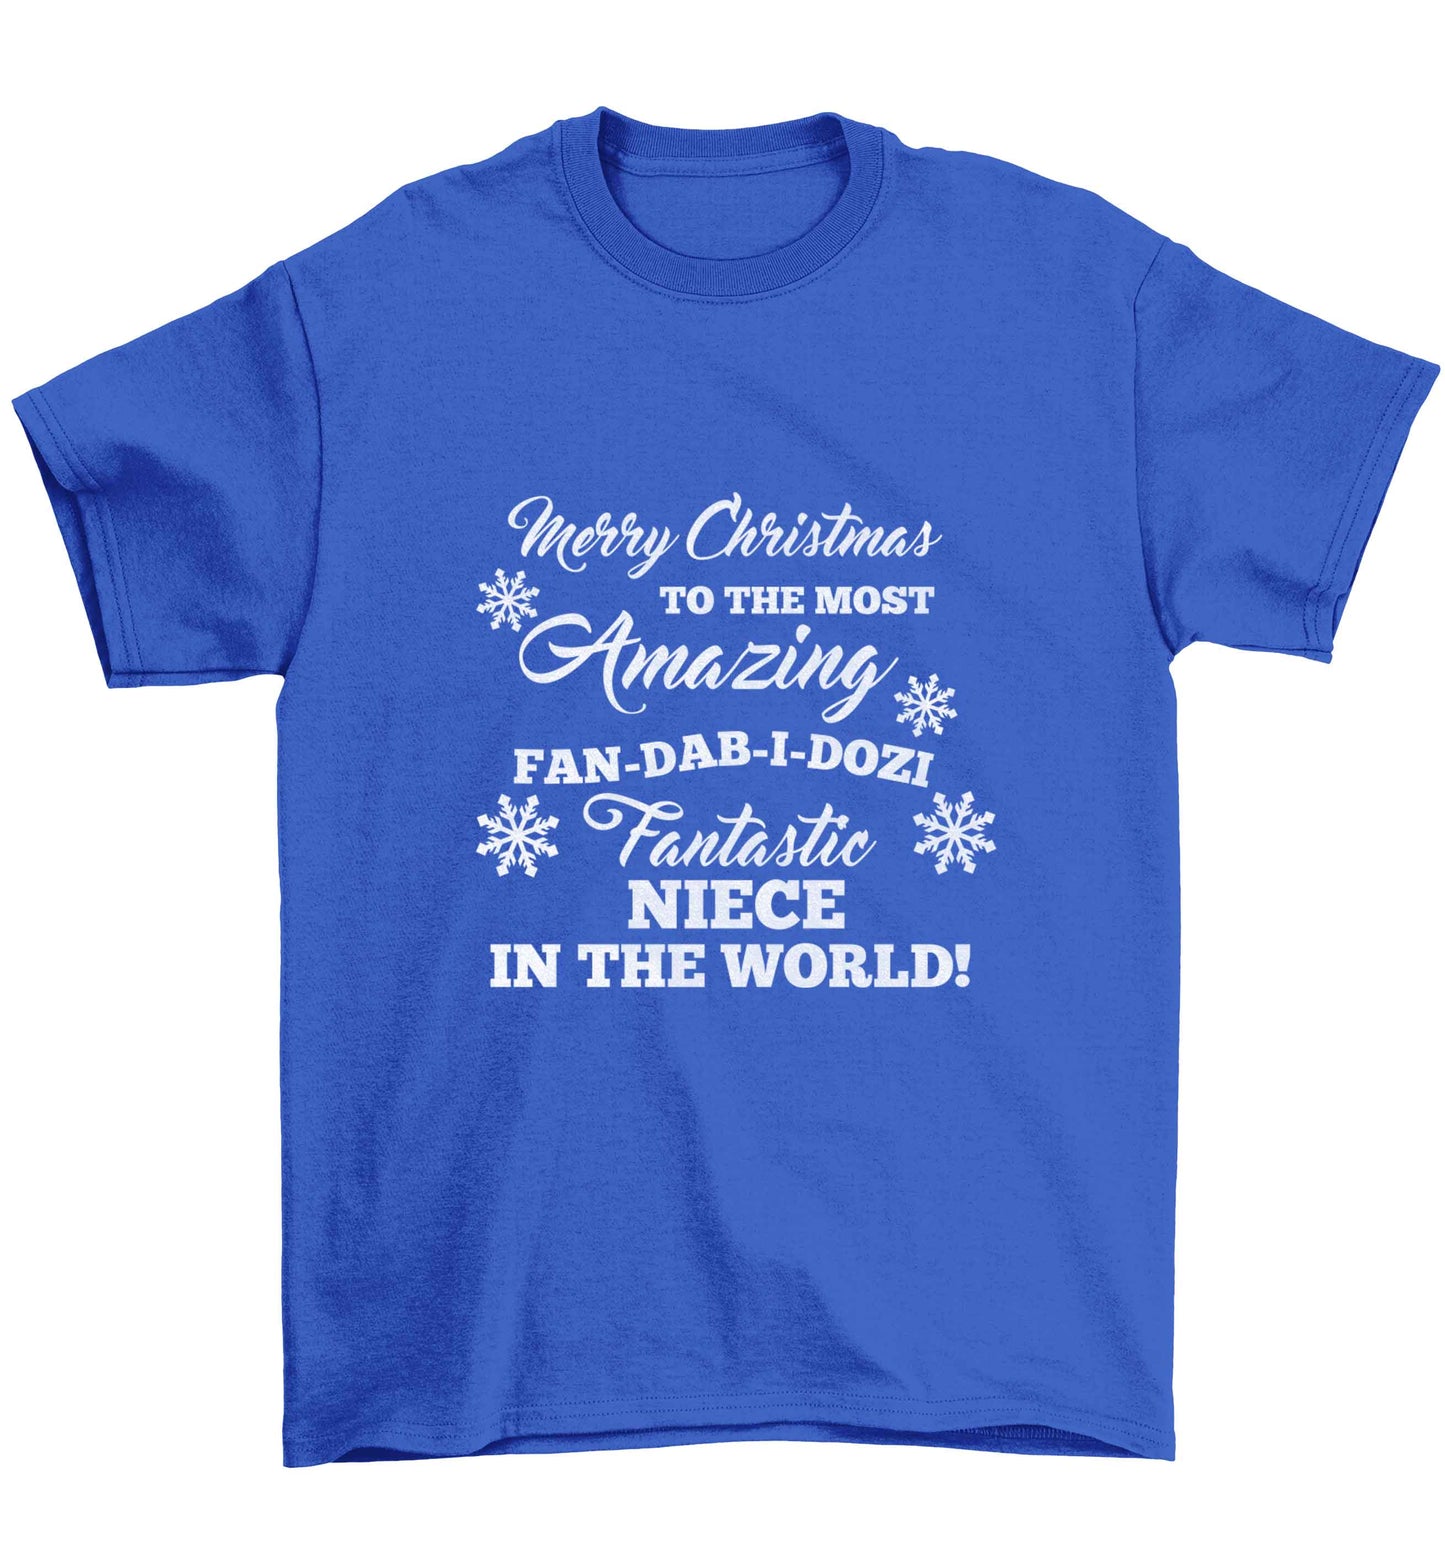 Merry Christmas to the most amazing fan-dab-i-dozi fantasic Niece in the world Children's blue Tshirt 12-13 Years